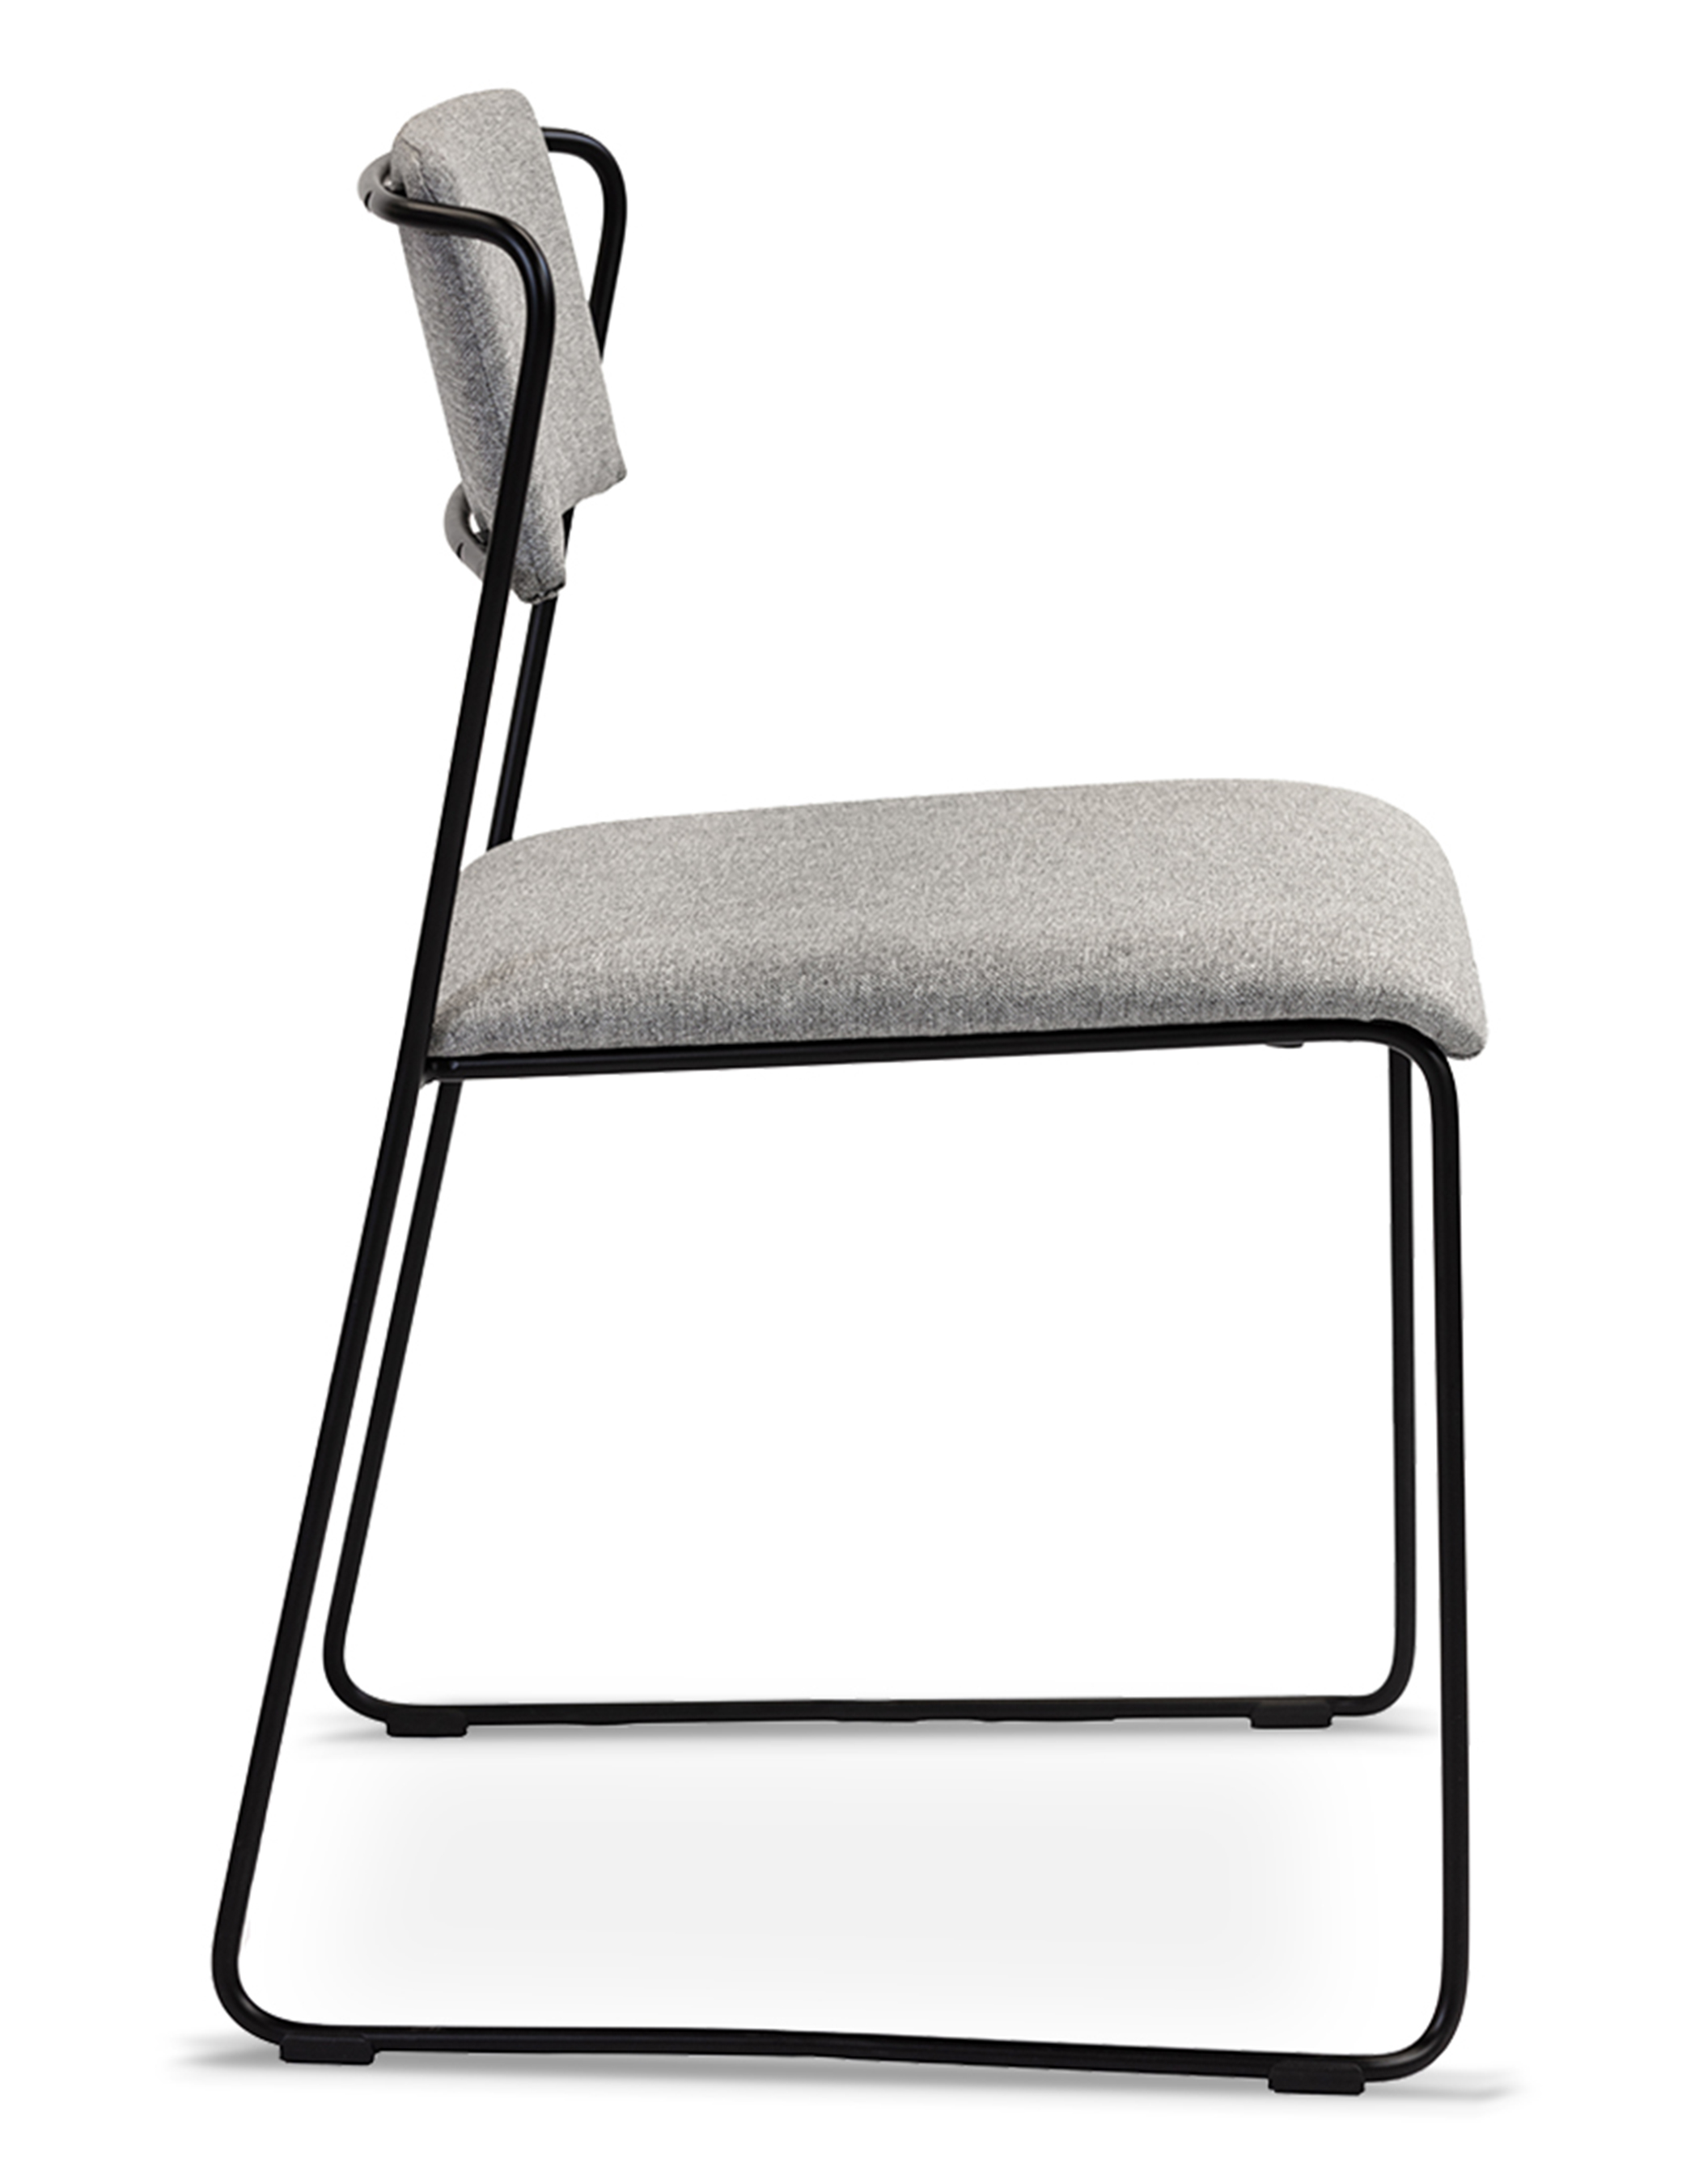 WS - Transit chair - Full Upholstery (Side)